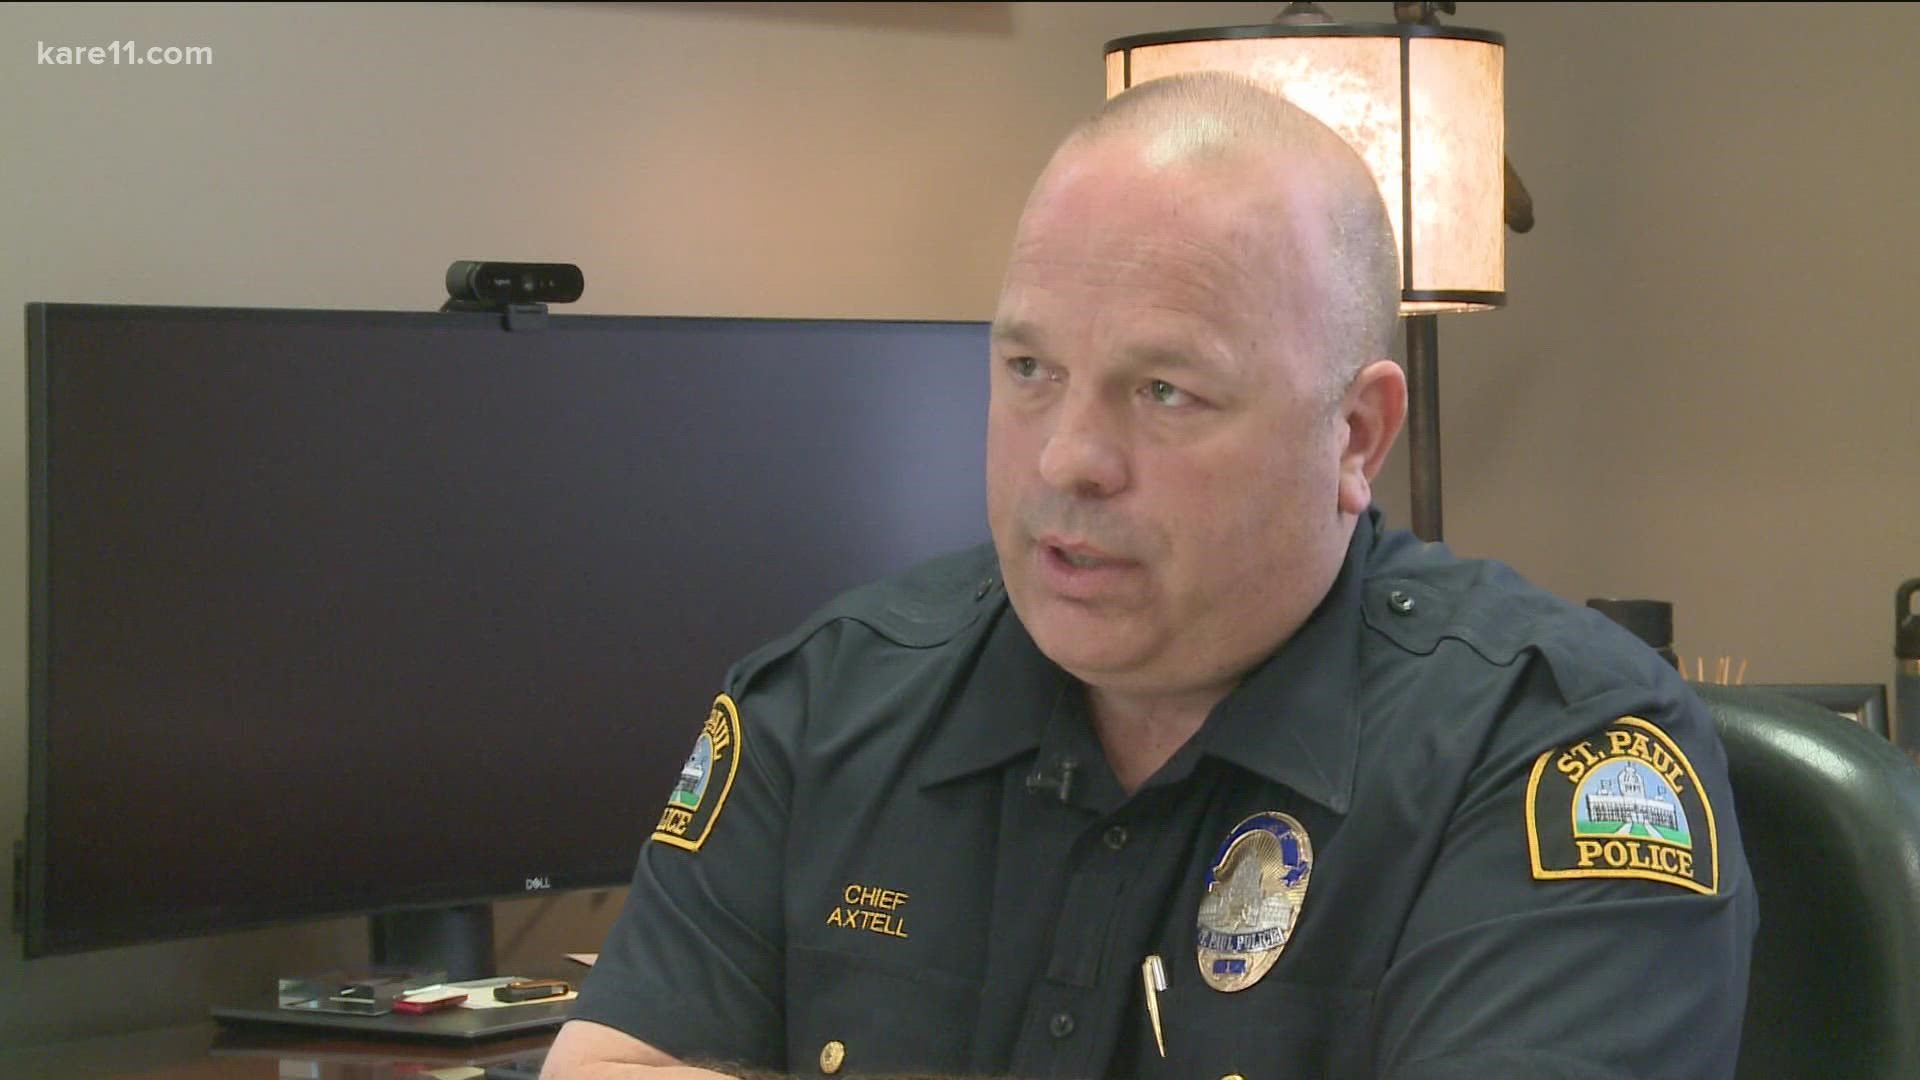 Chief Todd Axtell says the common denominator in shootings like Saturday's is that the gunmen already are prohibited from carrying firearms.